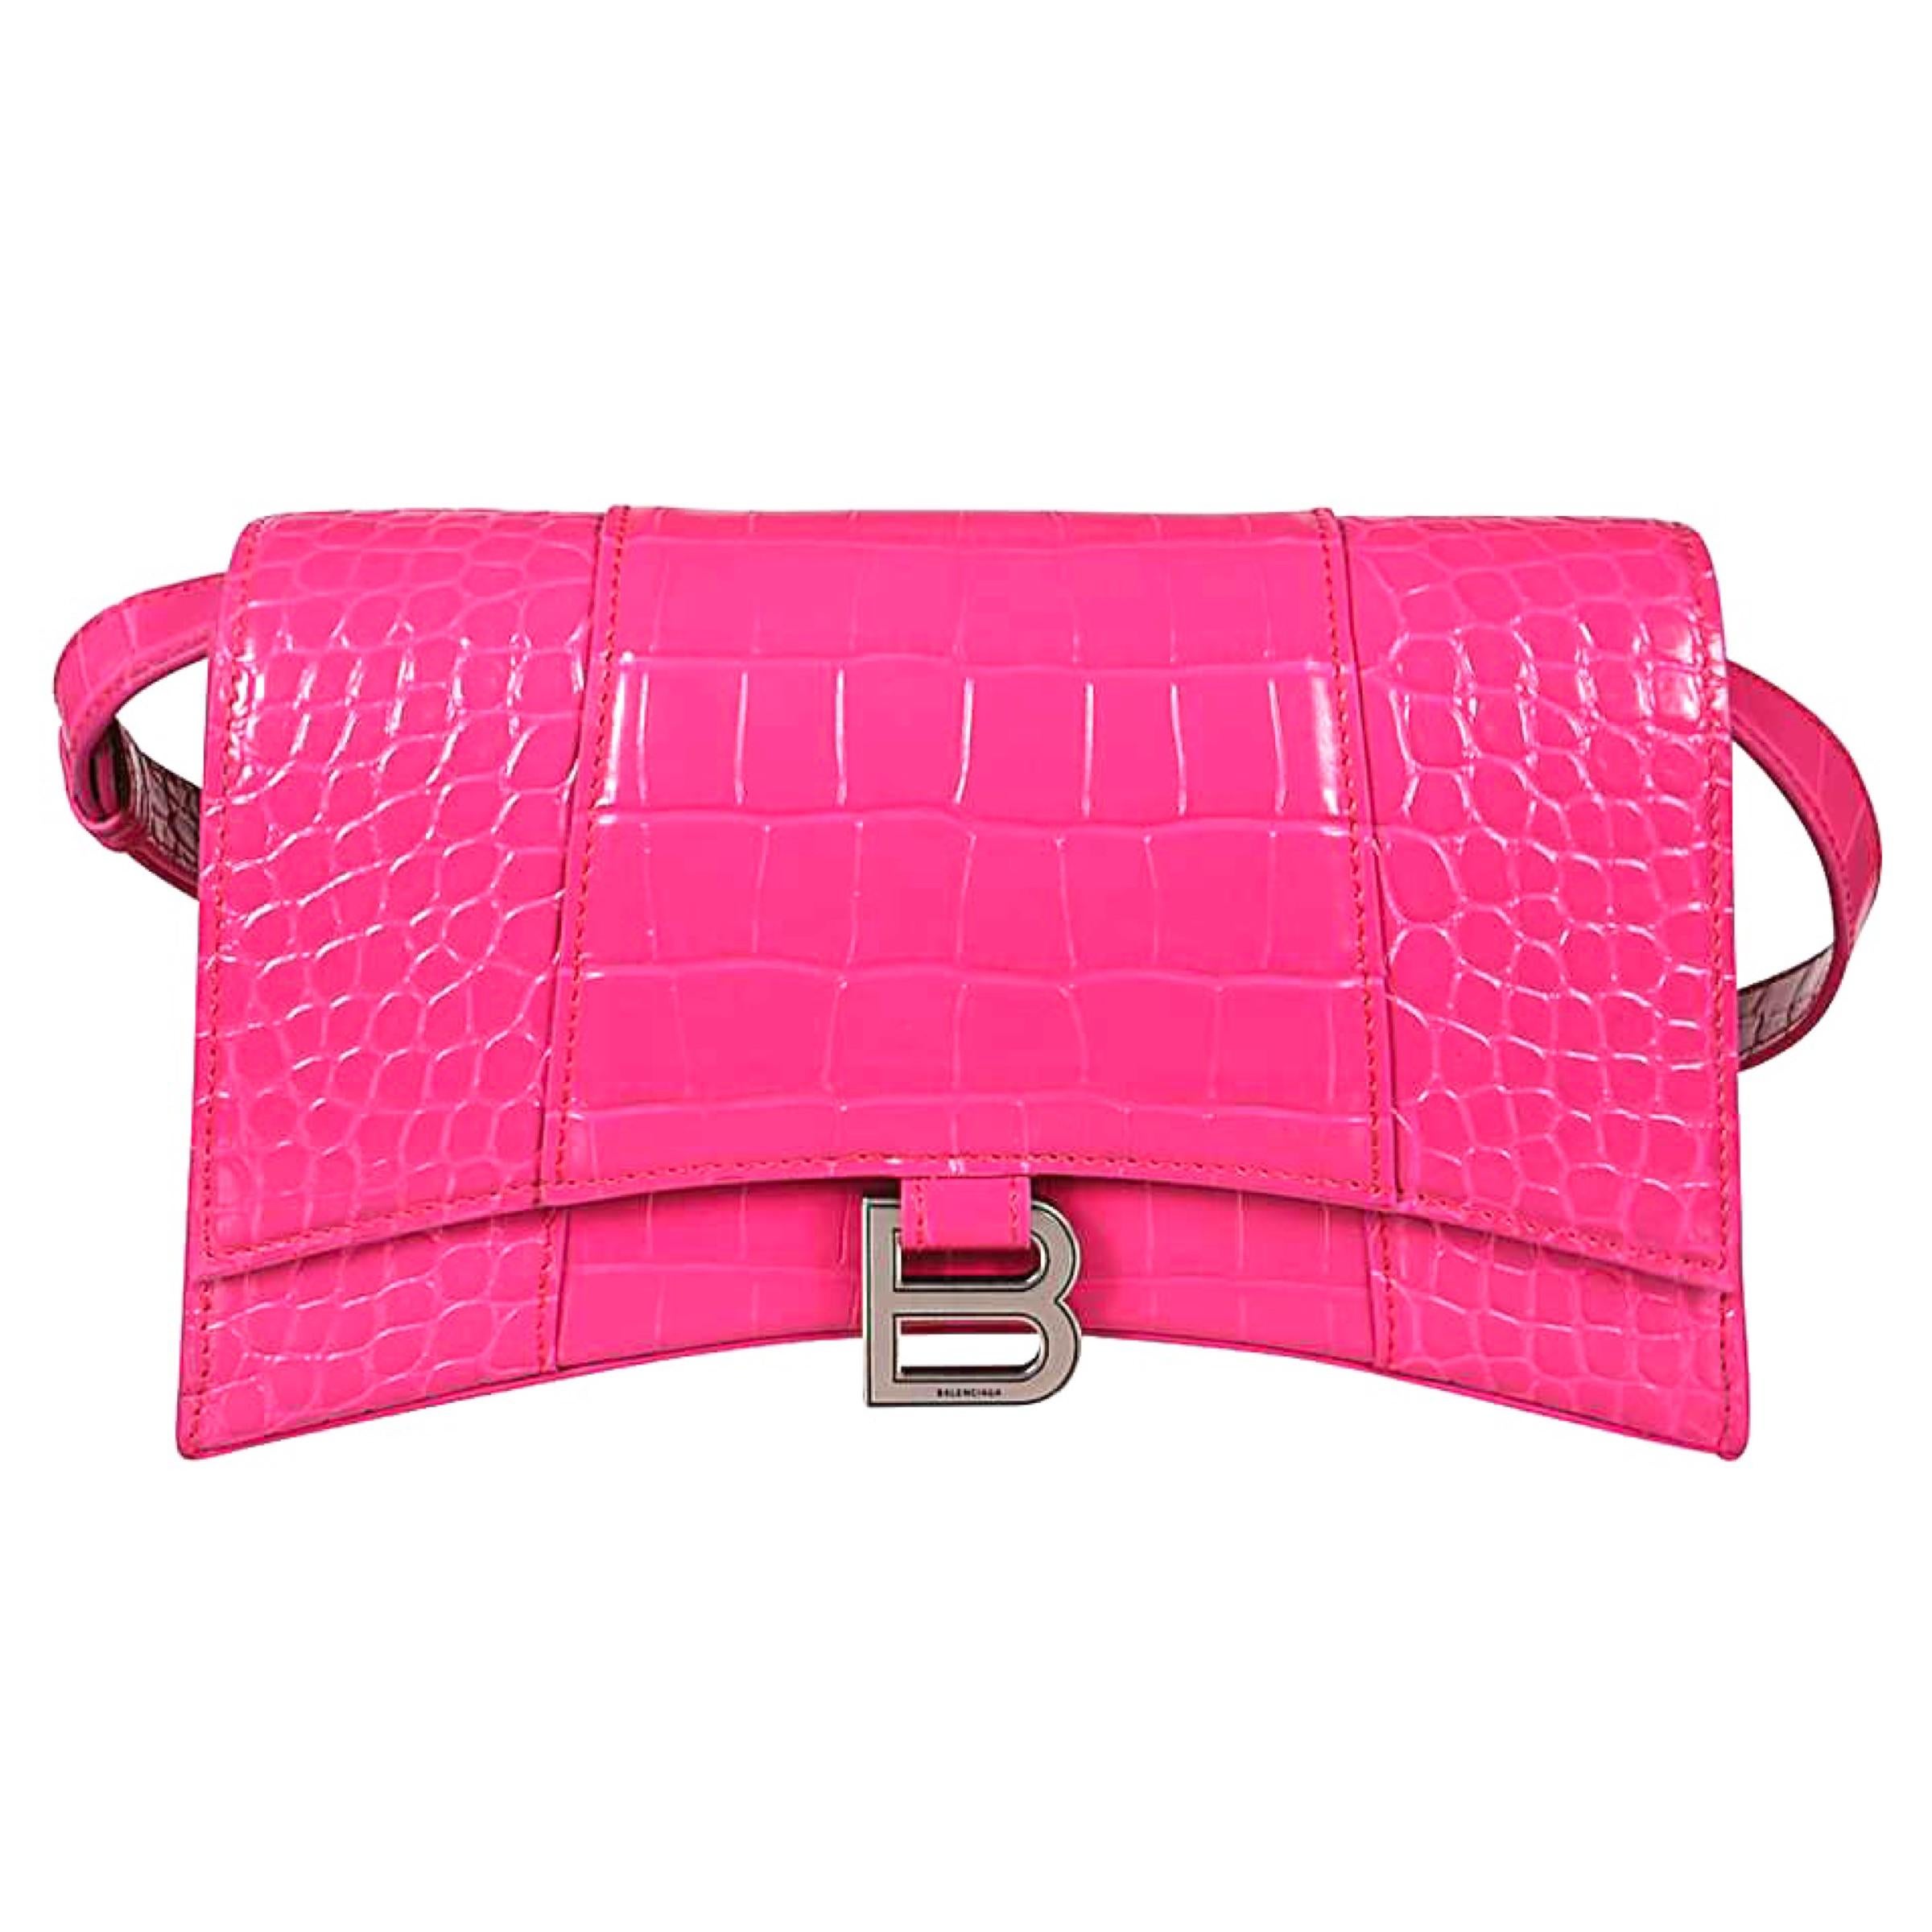 New Balenciaga Pink Hourglass Baguette Crocodile Skin Embossed Leather Shoulder Bag

Authenticity Guaranteed

DETAILS
Brand: Balenciaga
Condition: Brand new
Gender: Women
Category: Shoulder bag
Color: Pink
Material: Leather
Front B logo
Crocodile